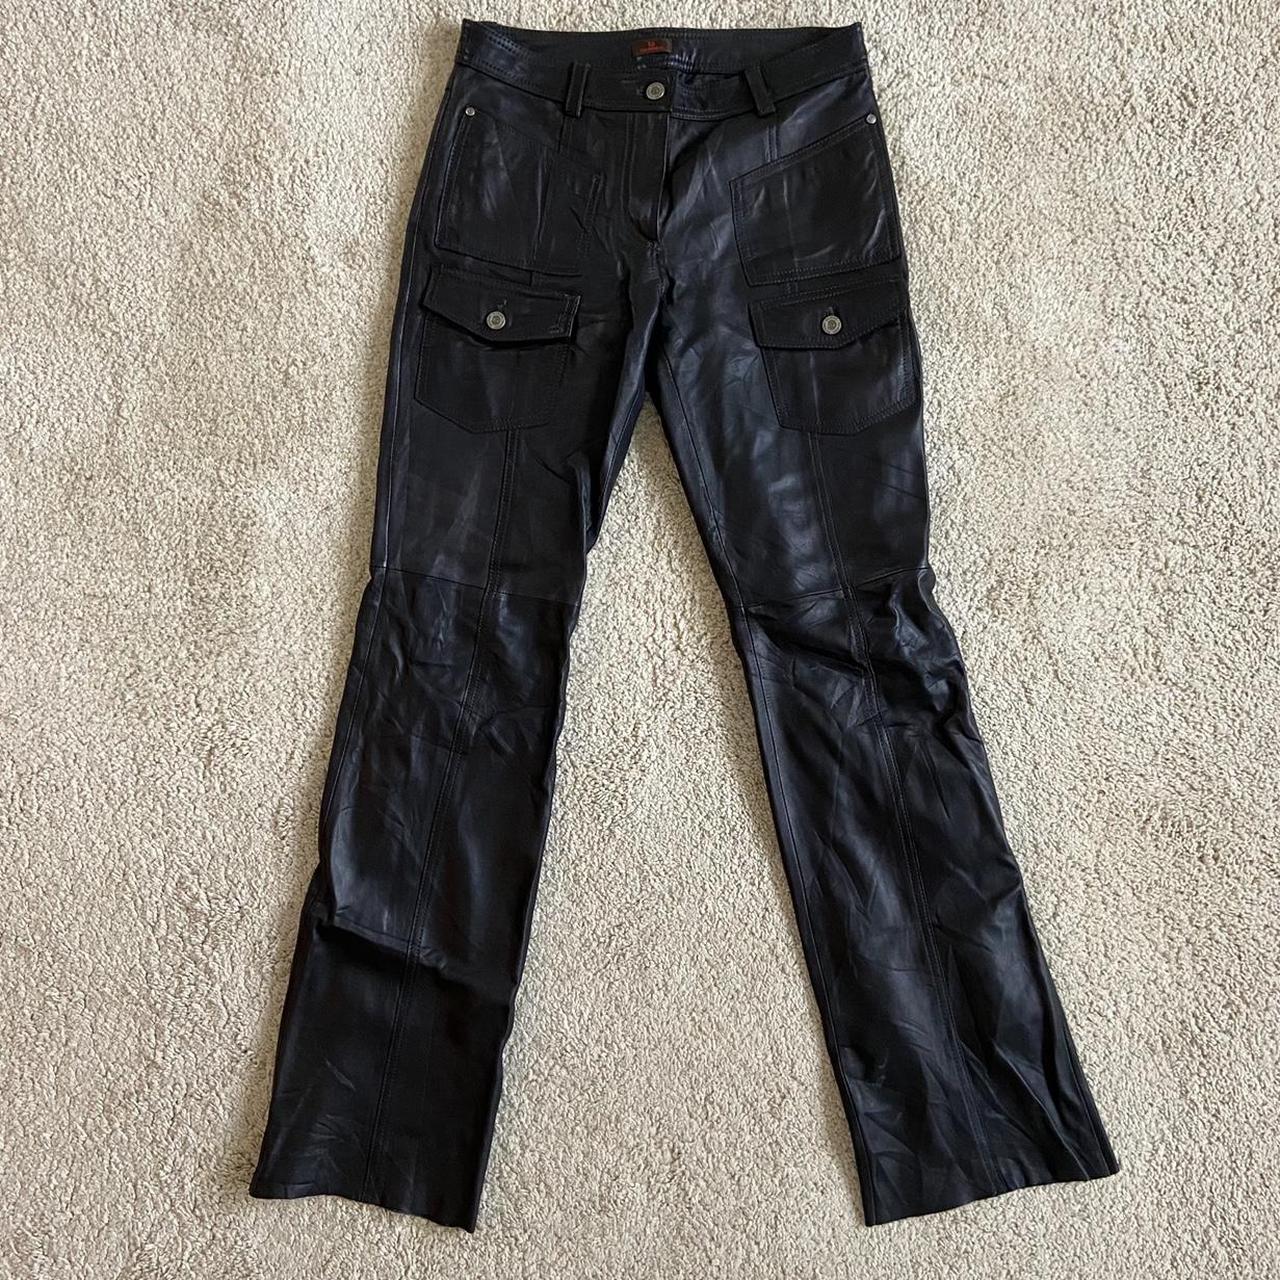 lowrise danier leather pants (if these fit me…….i... - Depop